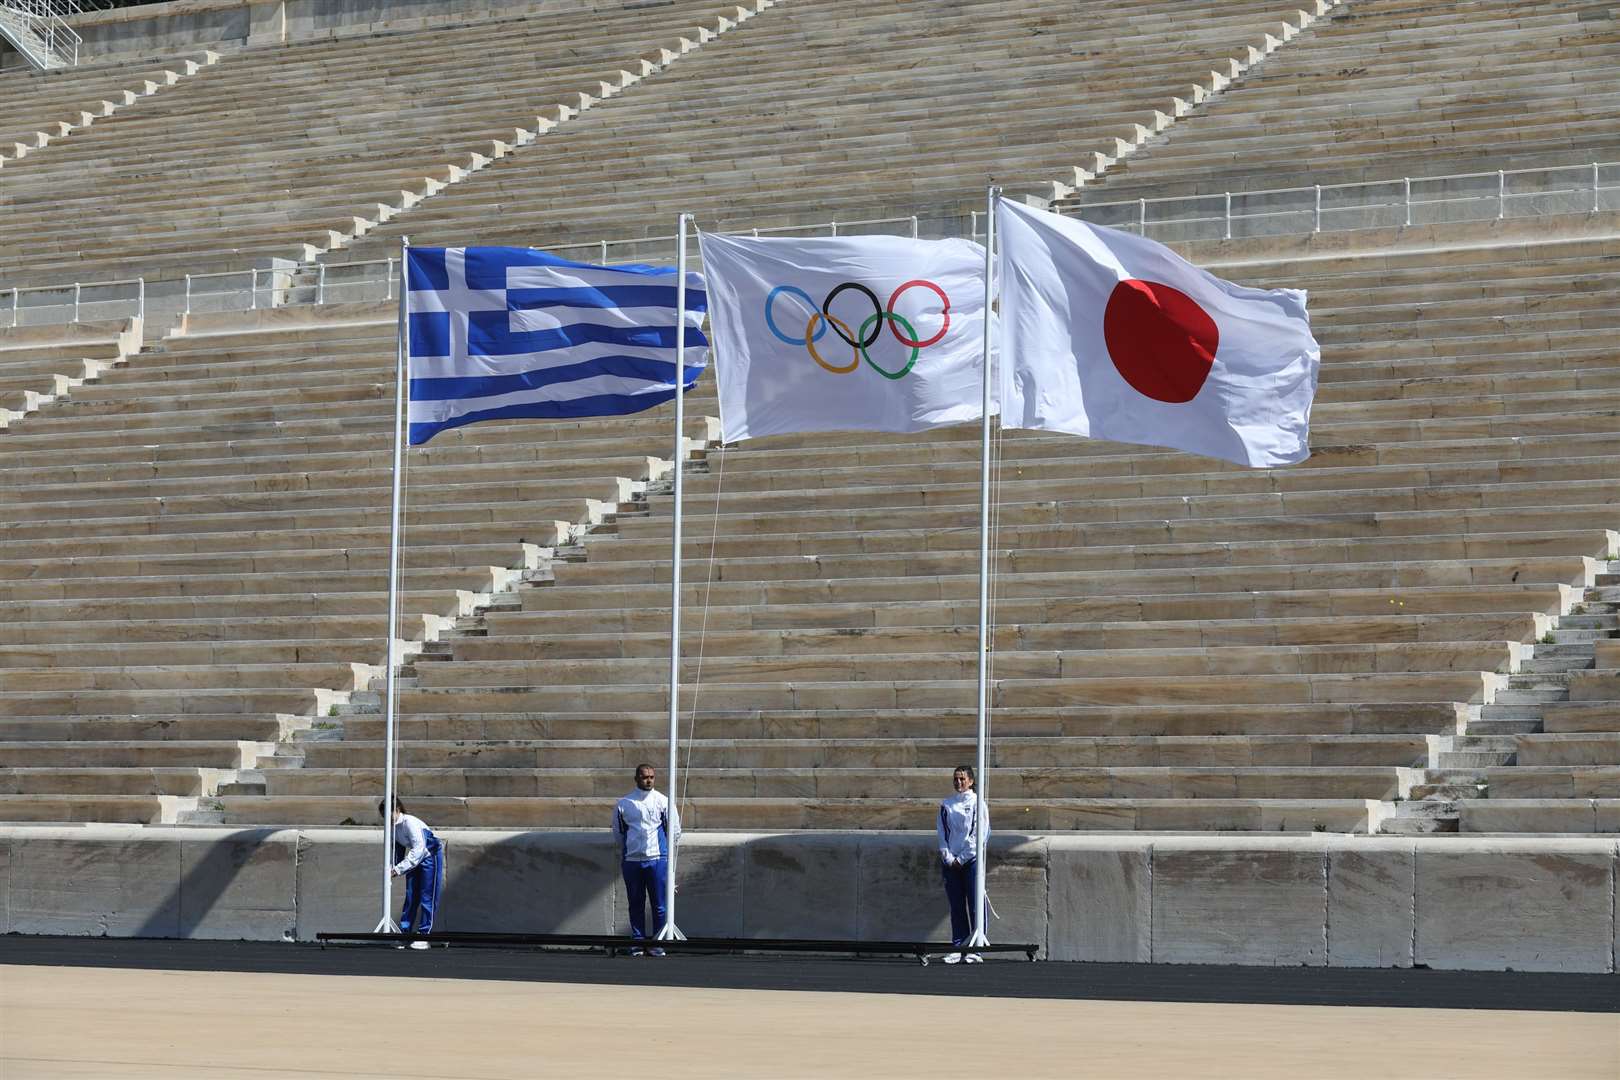 The official Olympic flame handover from Greece to Japan ahead of the torch's journey to Tokyo. Picture: IOC